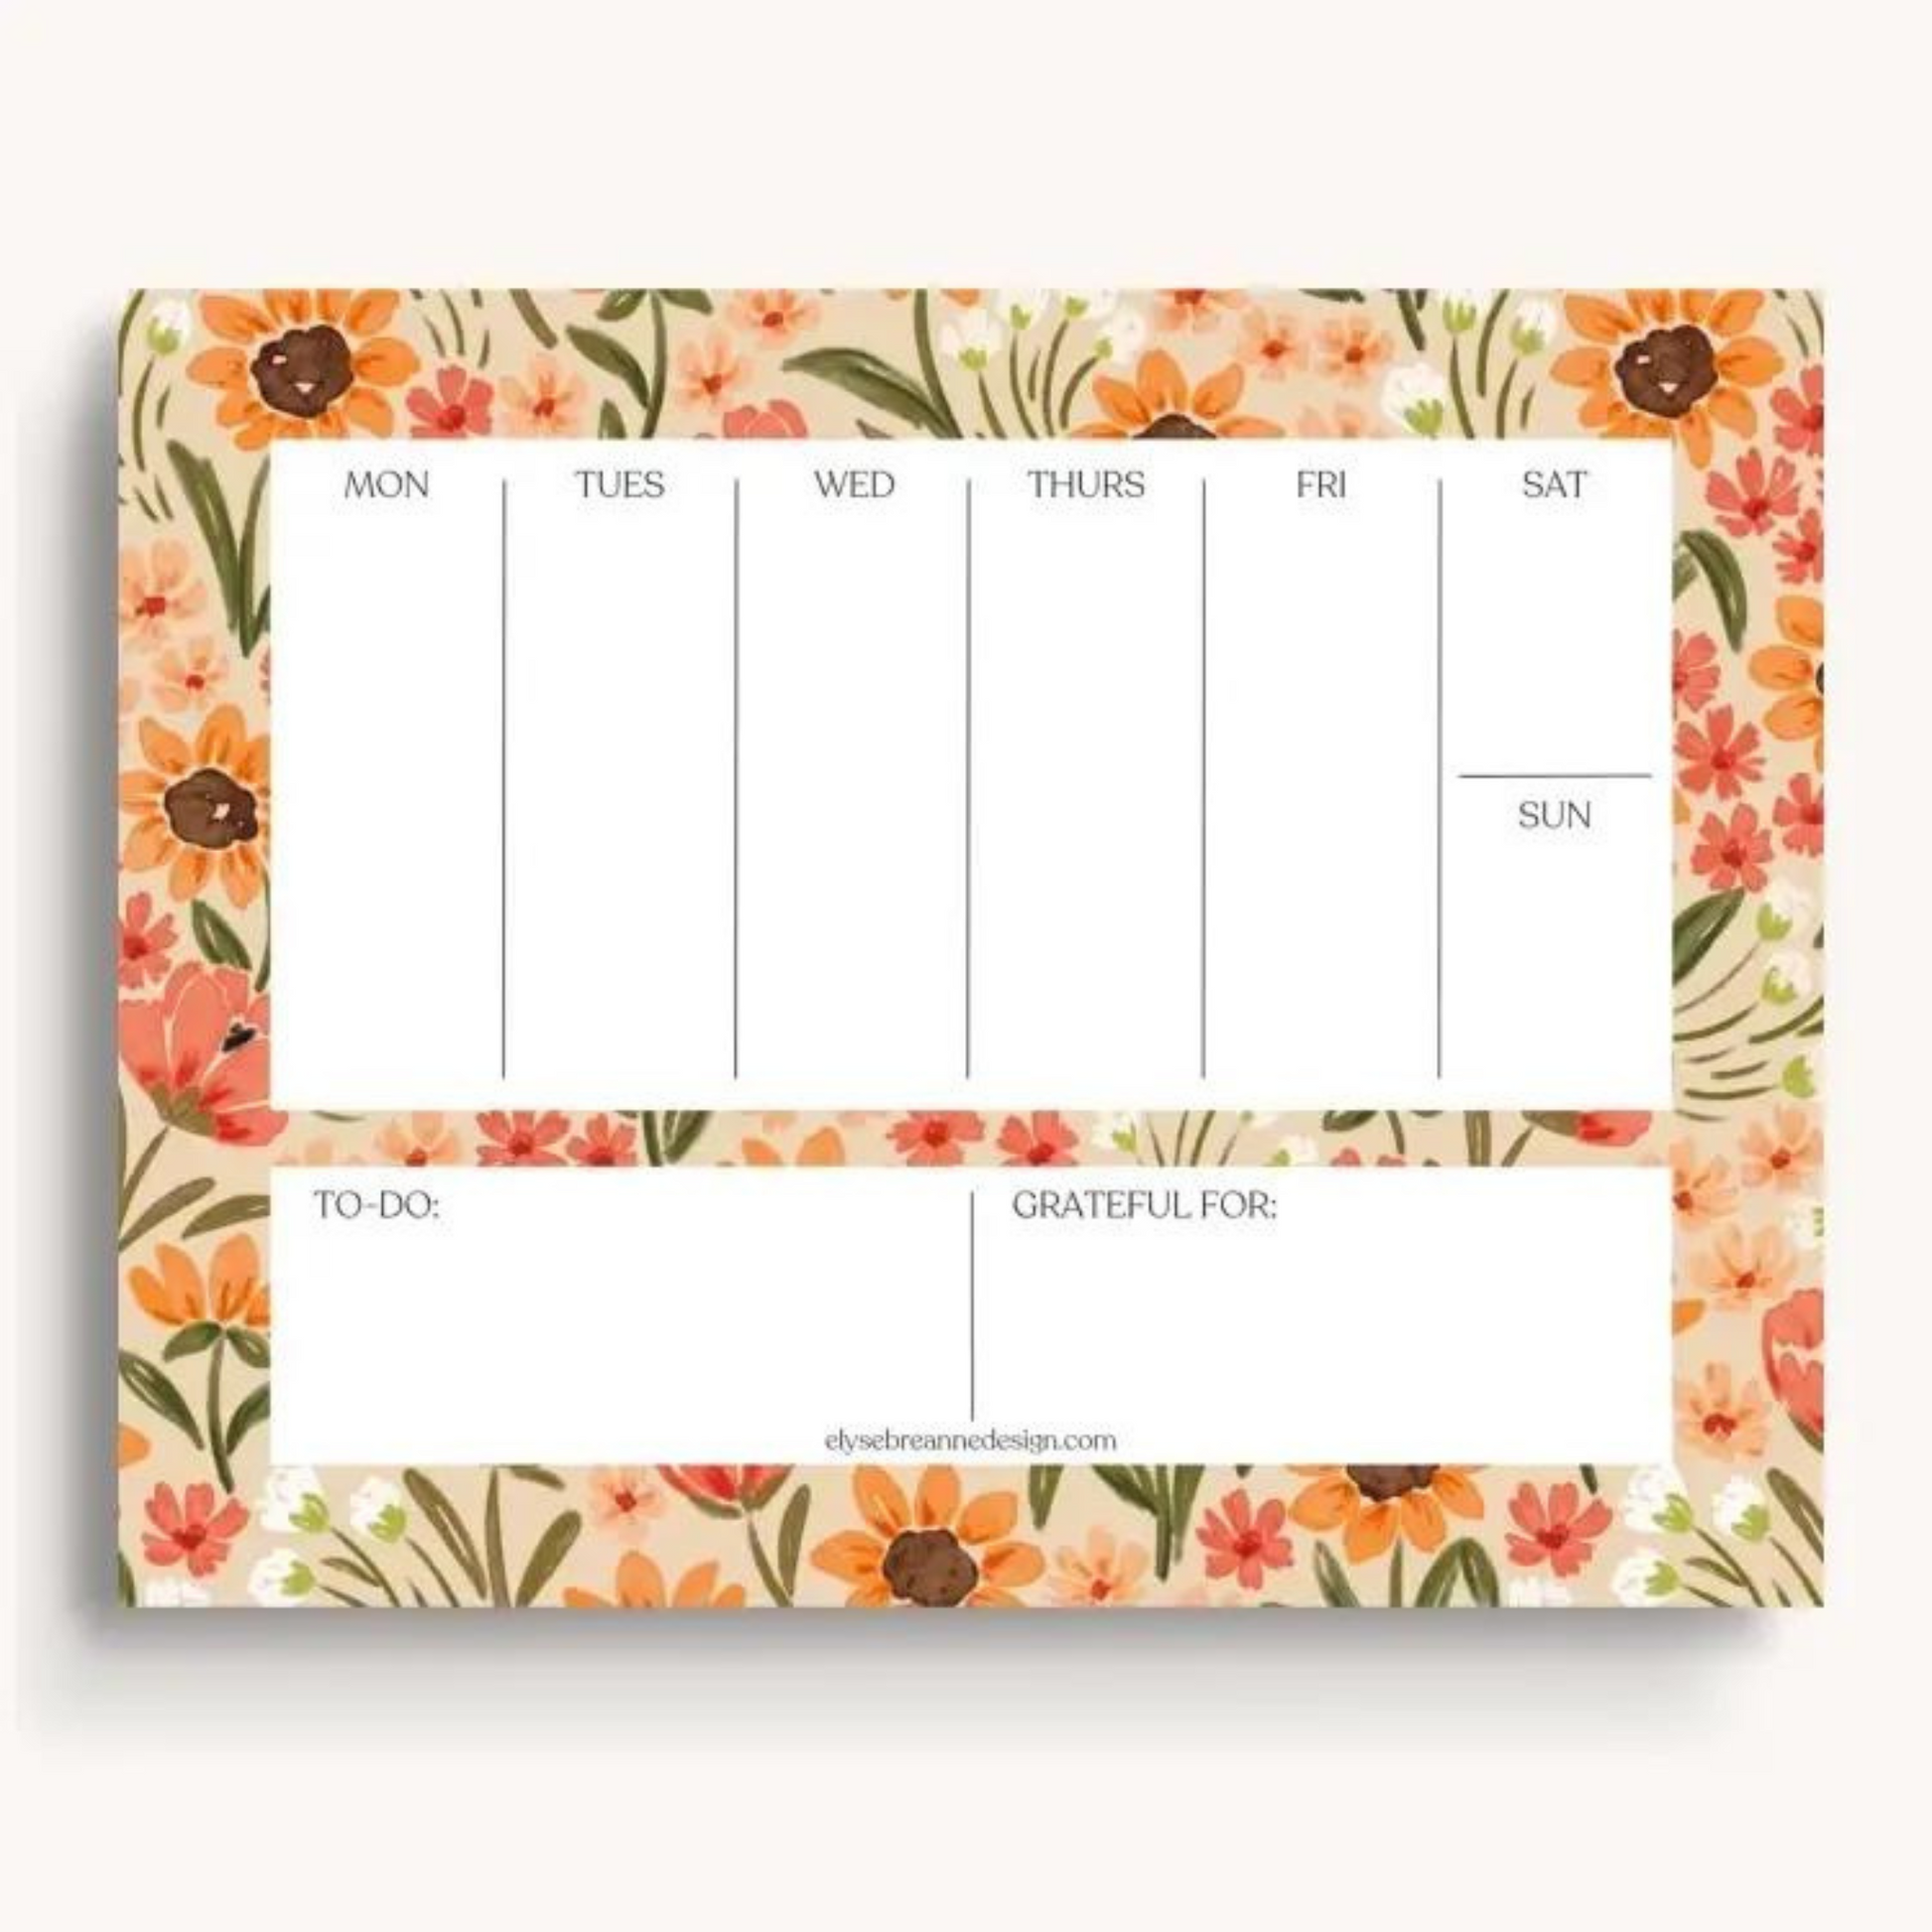 Get organized in style with this cute and functional weekly planner note pad.